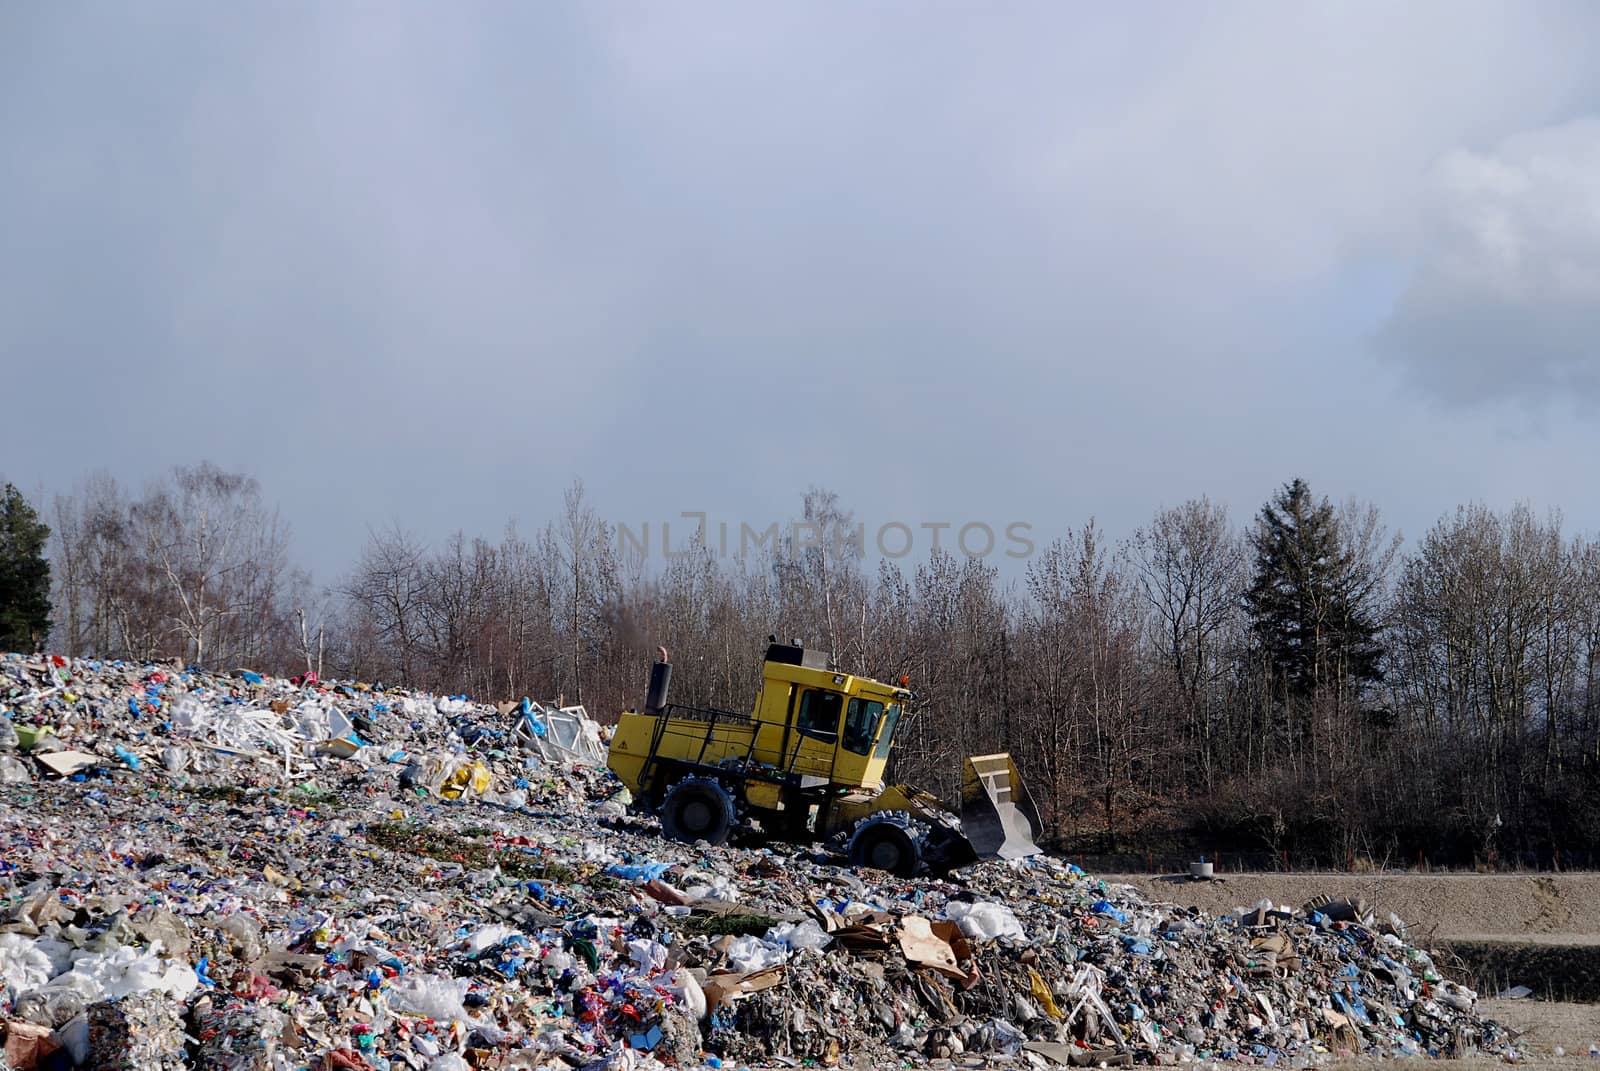 Bulldozer is processing waste in the dump